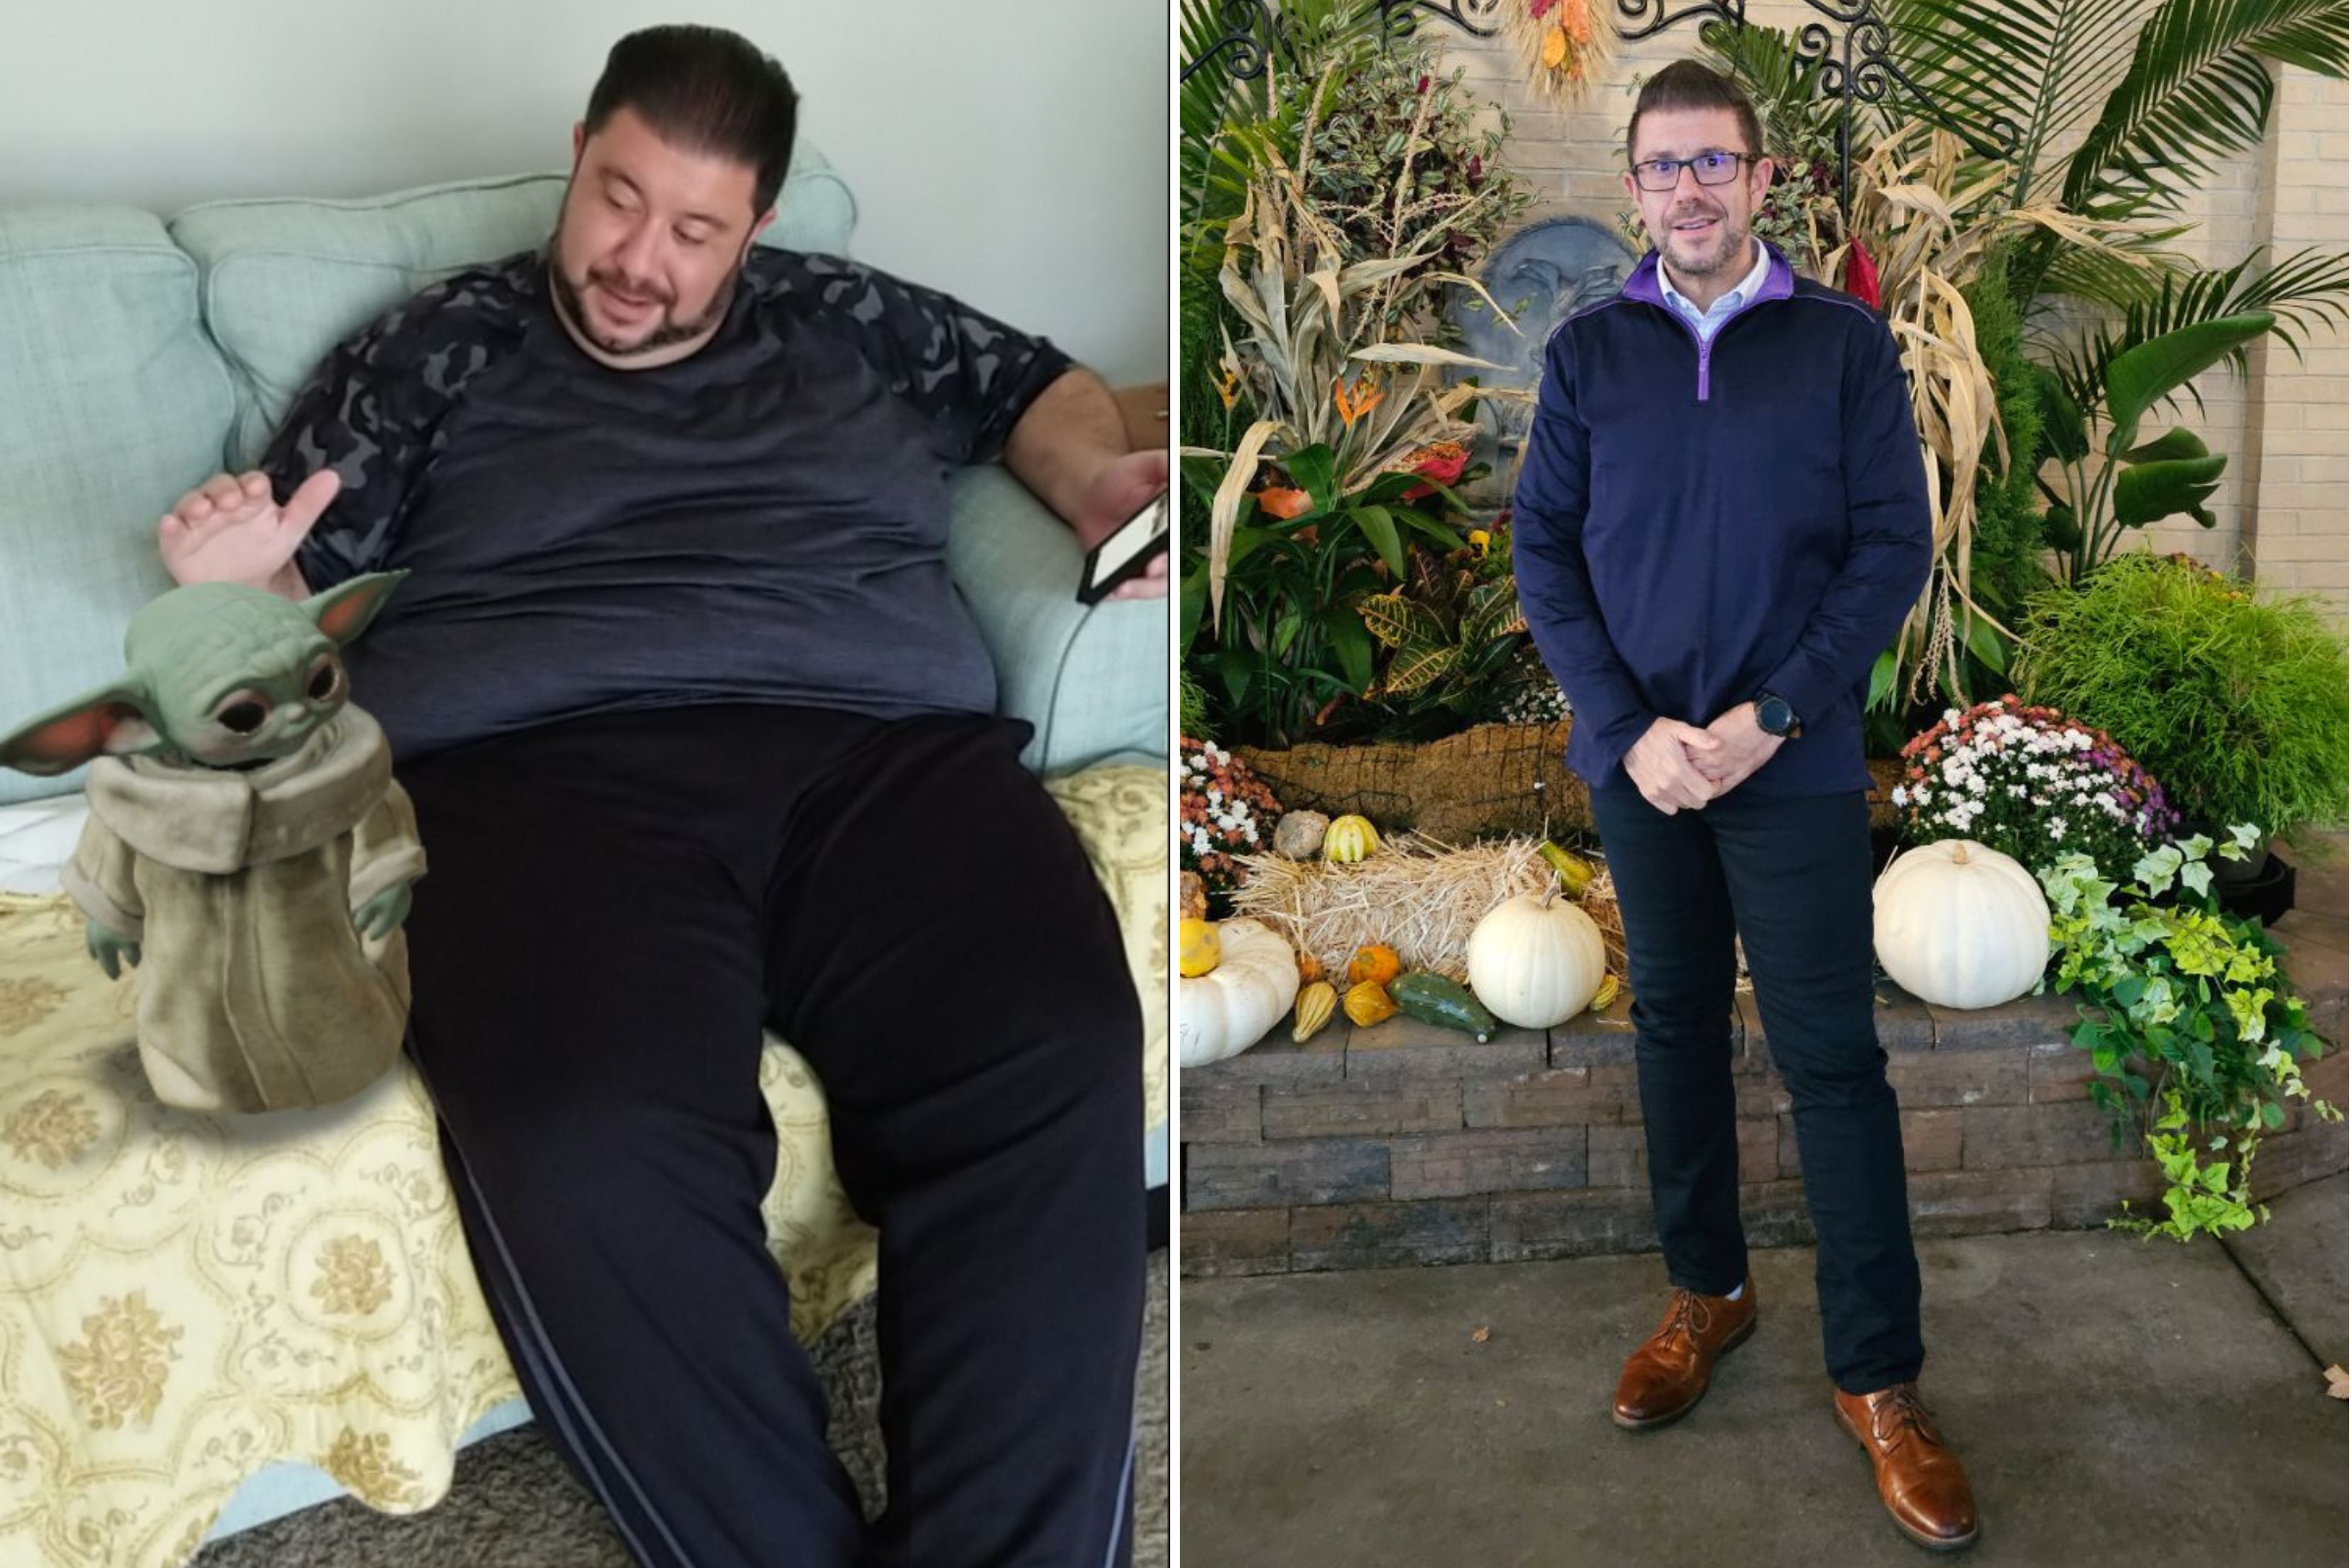 Man Loses Over 200 Pounds Without Exercise, Medication, or Surgery: How He Did It